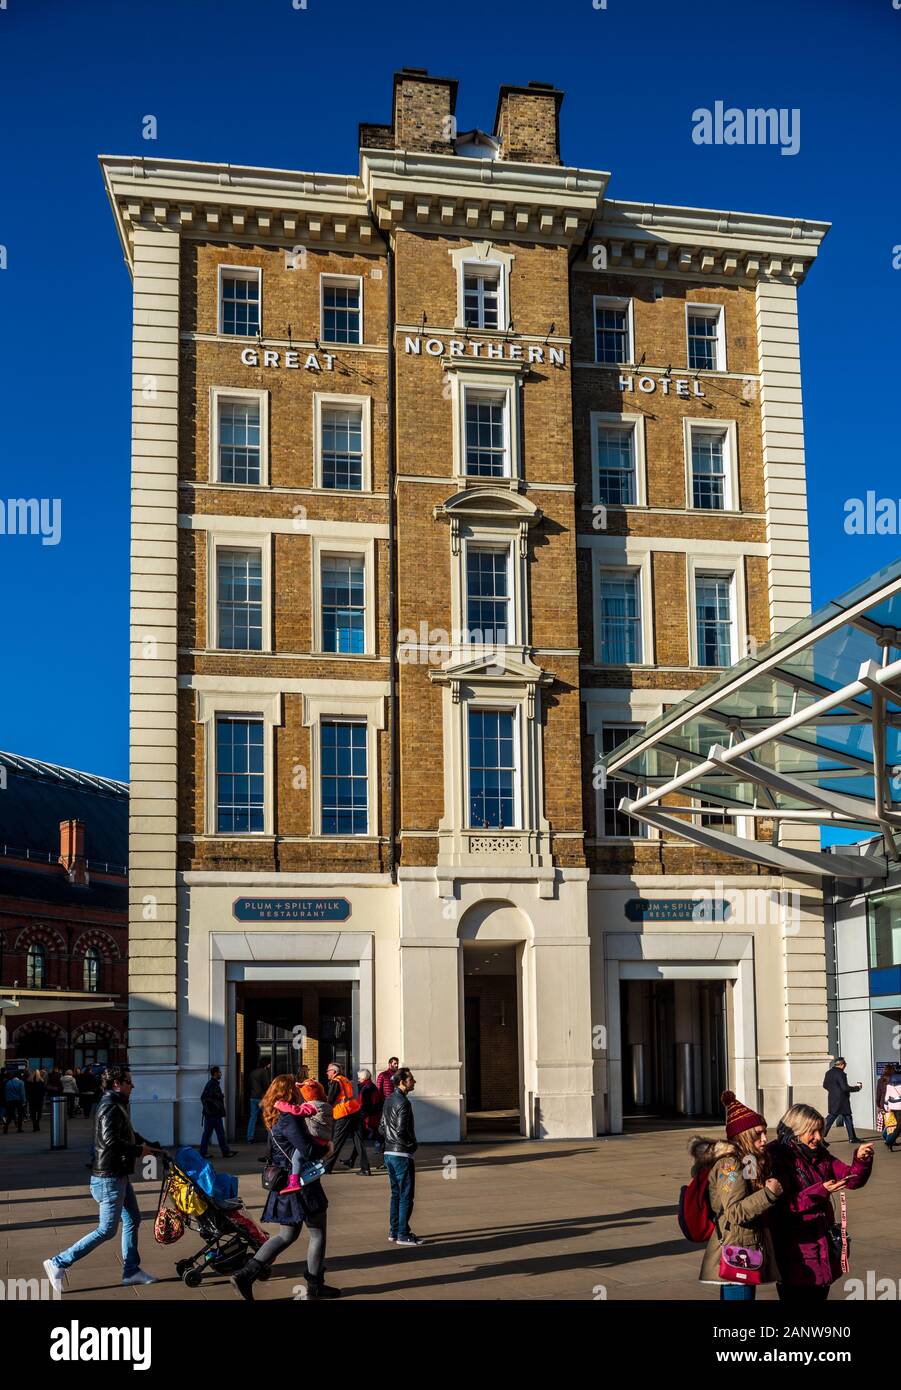 Great Northern Hotel at London's Kings Cross Station. Built 1854. Stock Photo